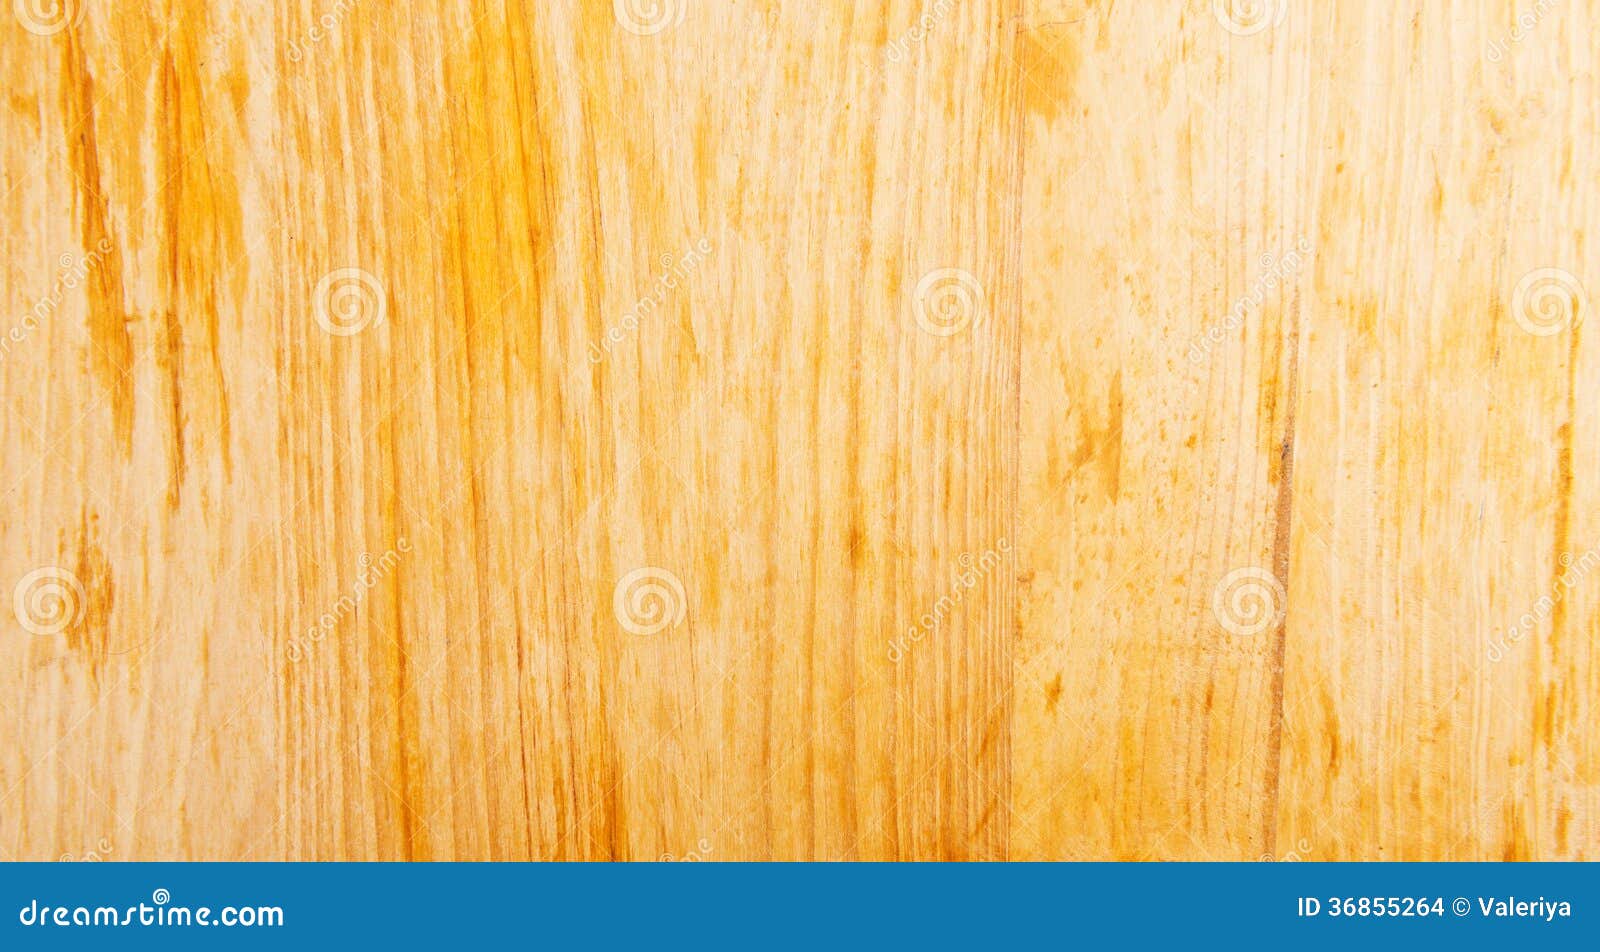 5,536,236 Wooden Board Images, Stock Photos, 3D objects, & Vectors